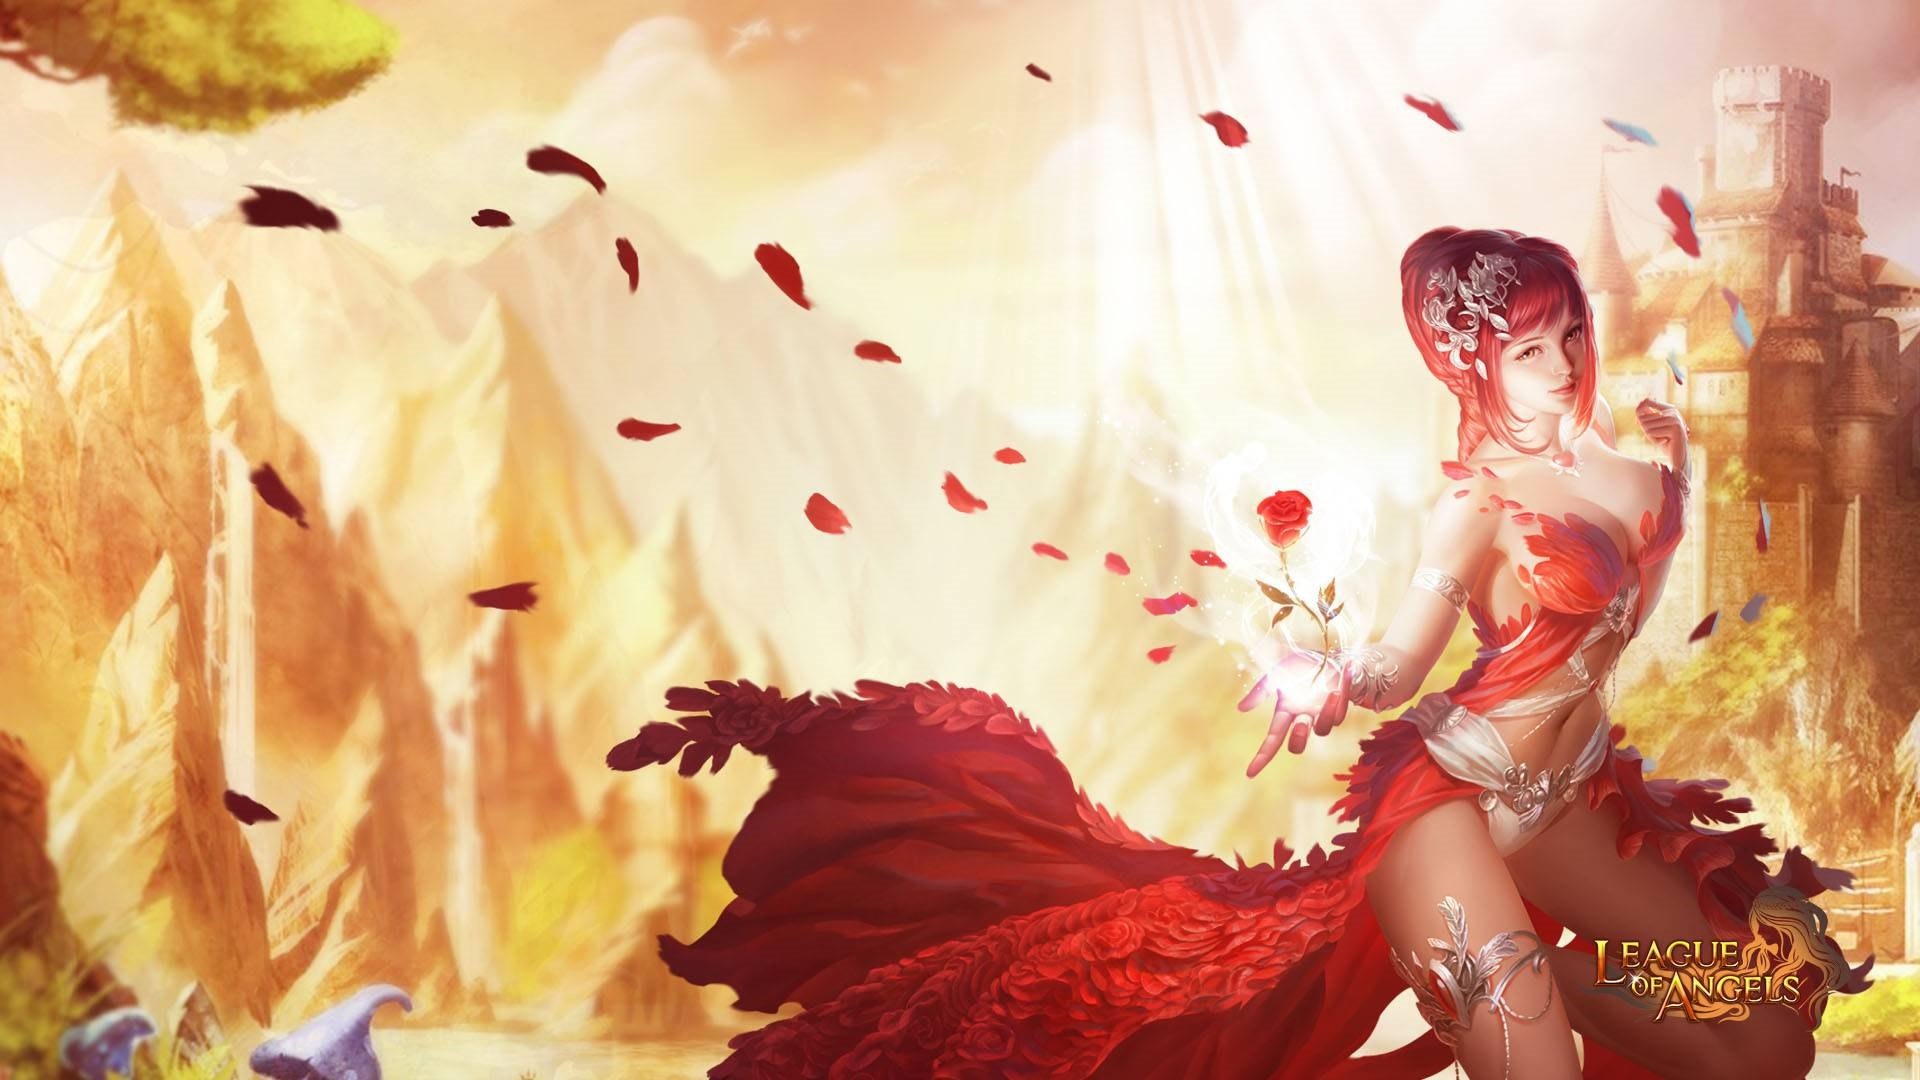 League of Angels, wallpapers collection, loa information, angelic realm, 1920x1080 Full HD Desktop